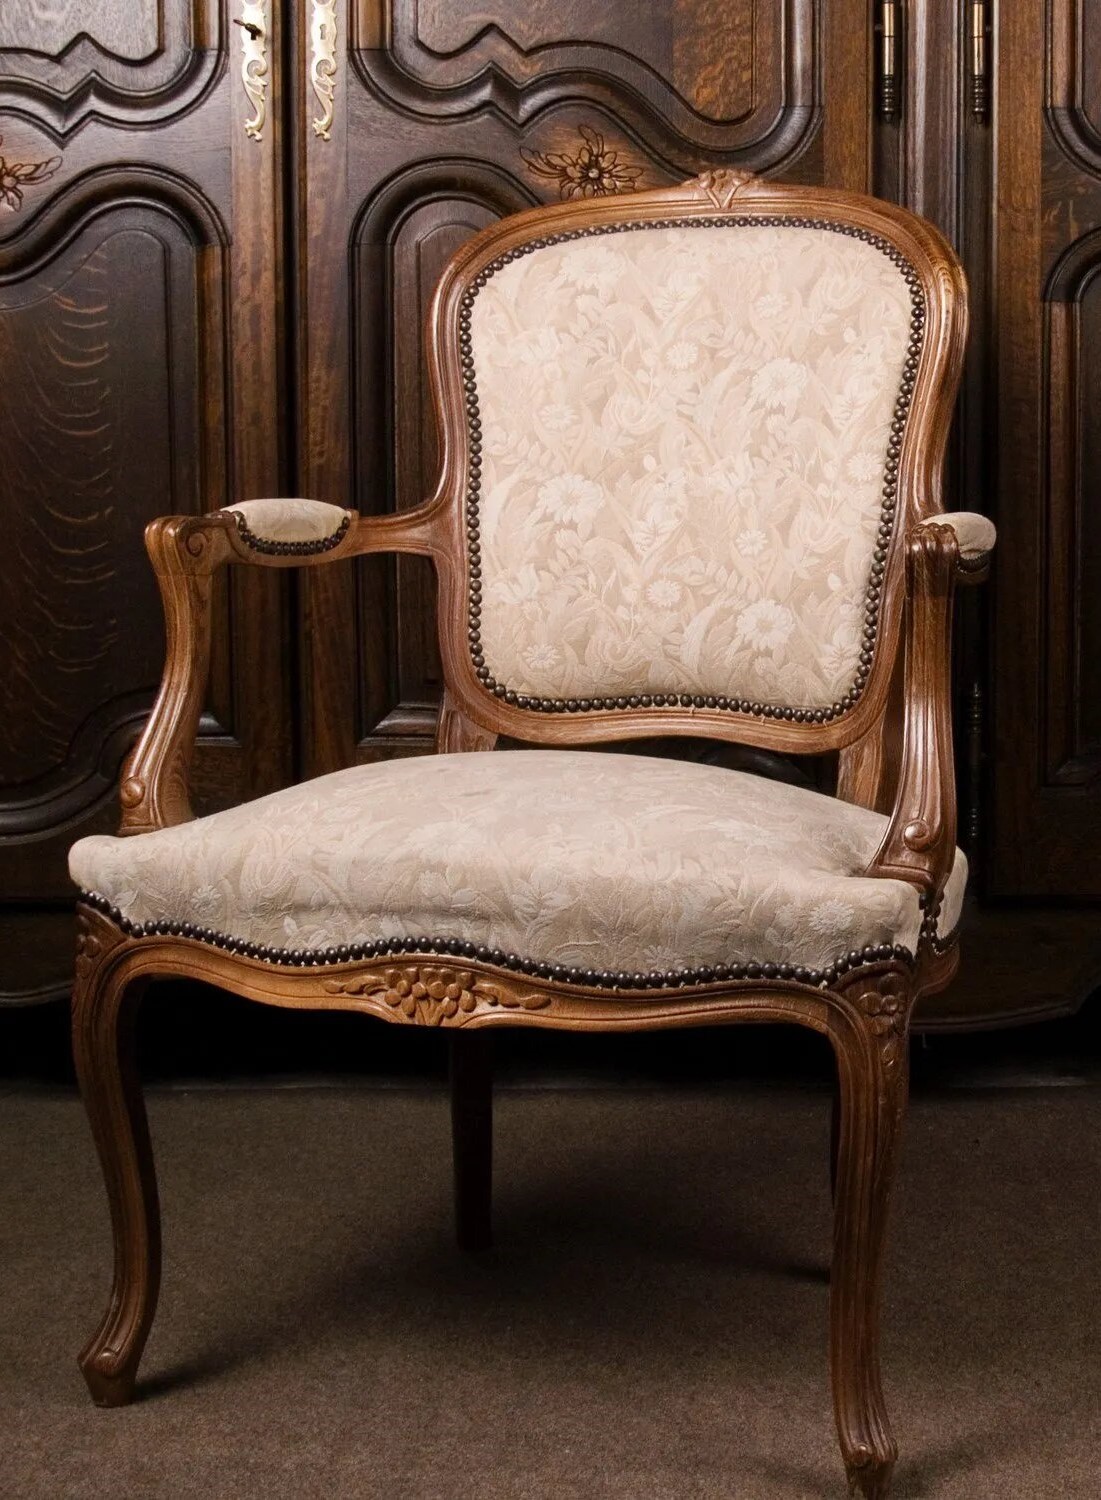 What is reupholstery?